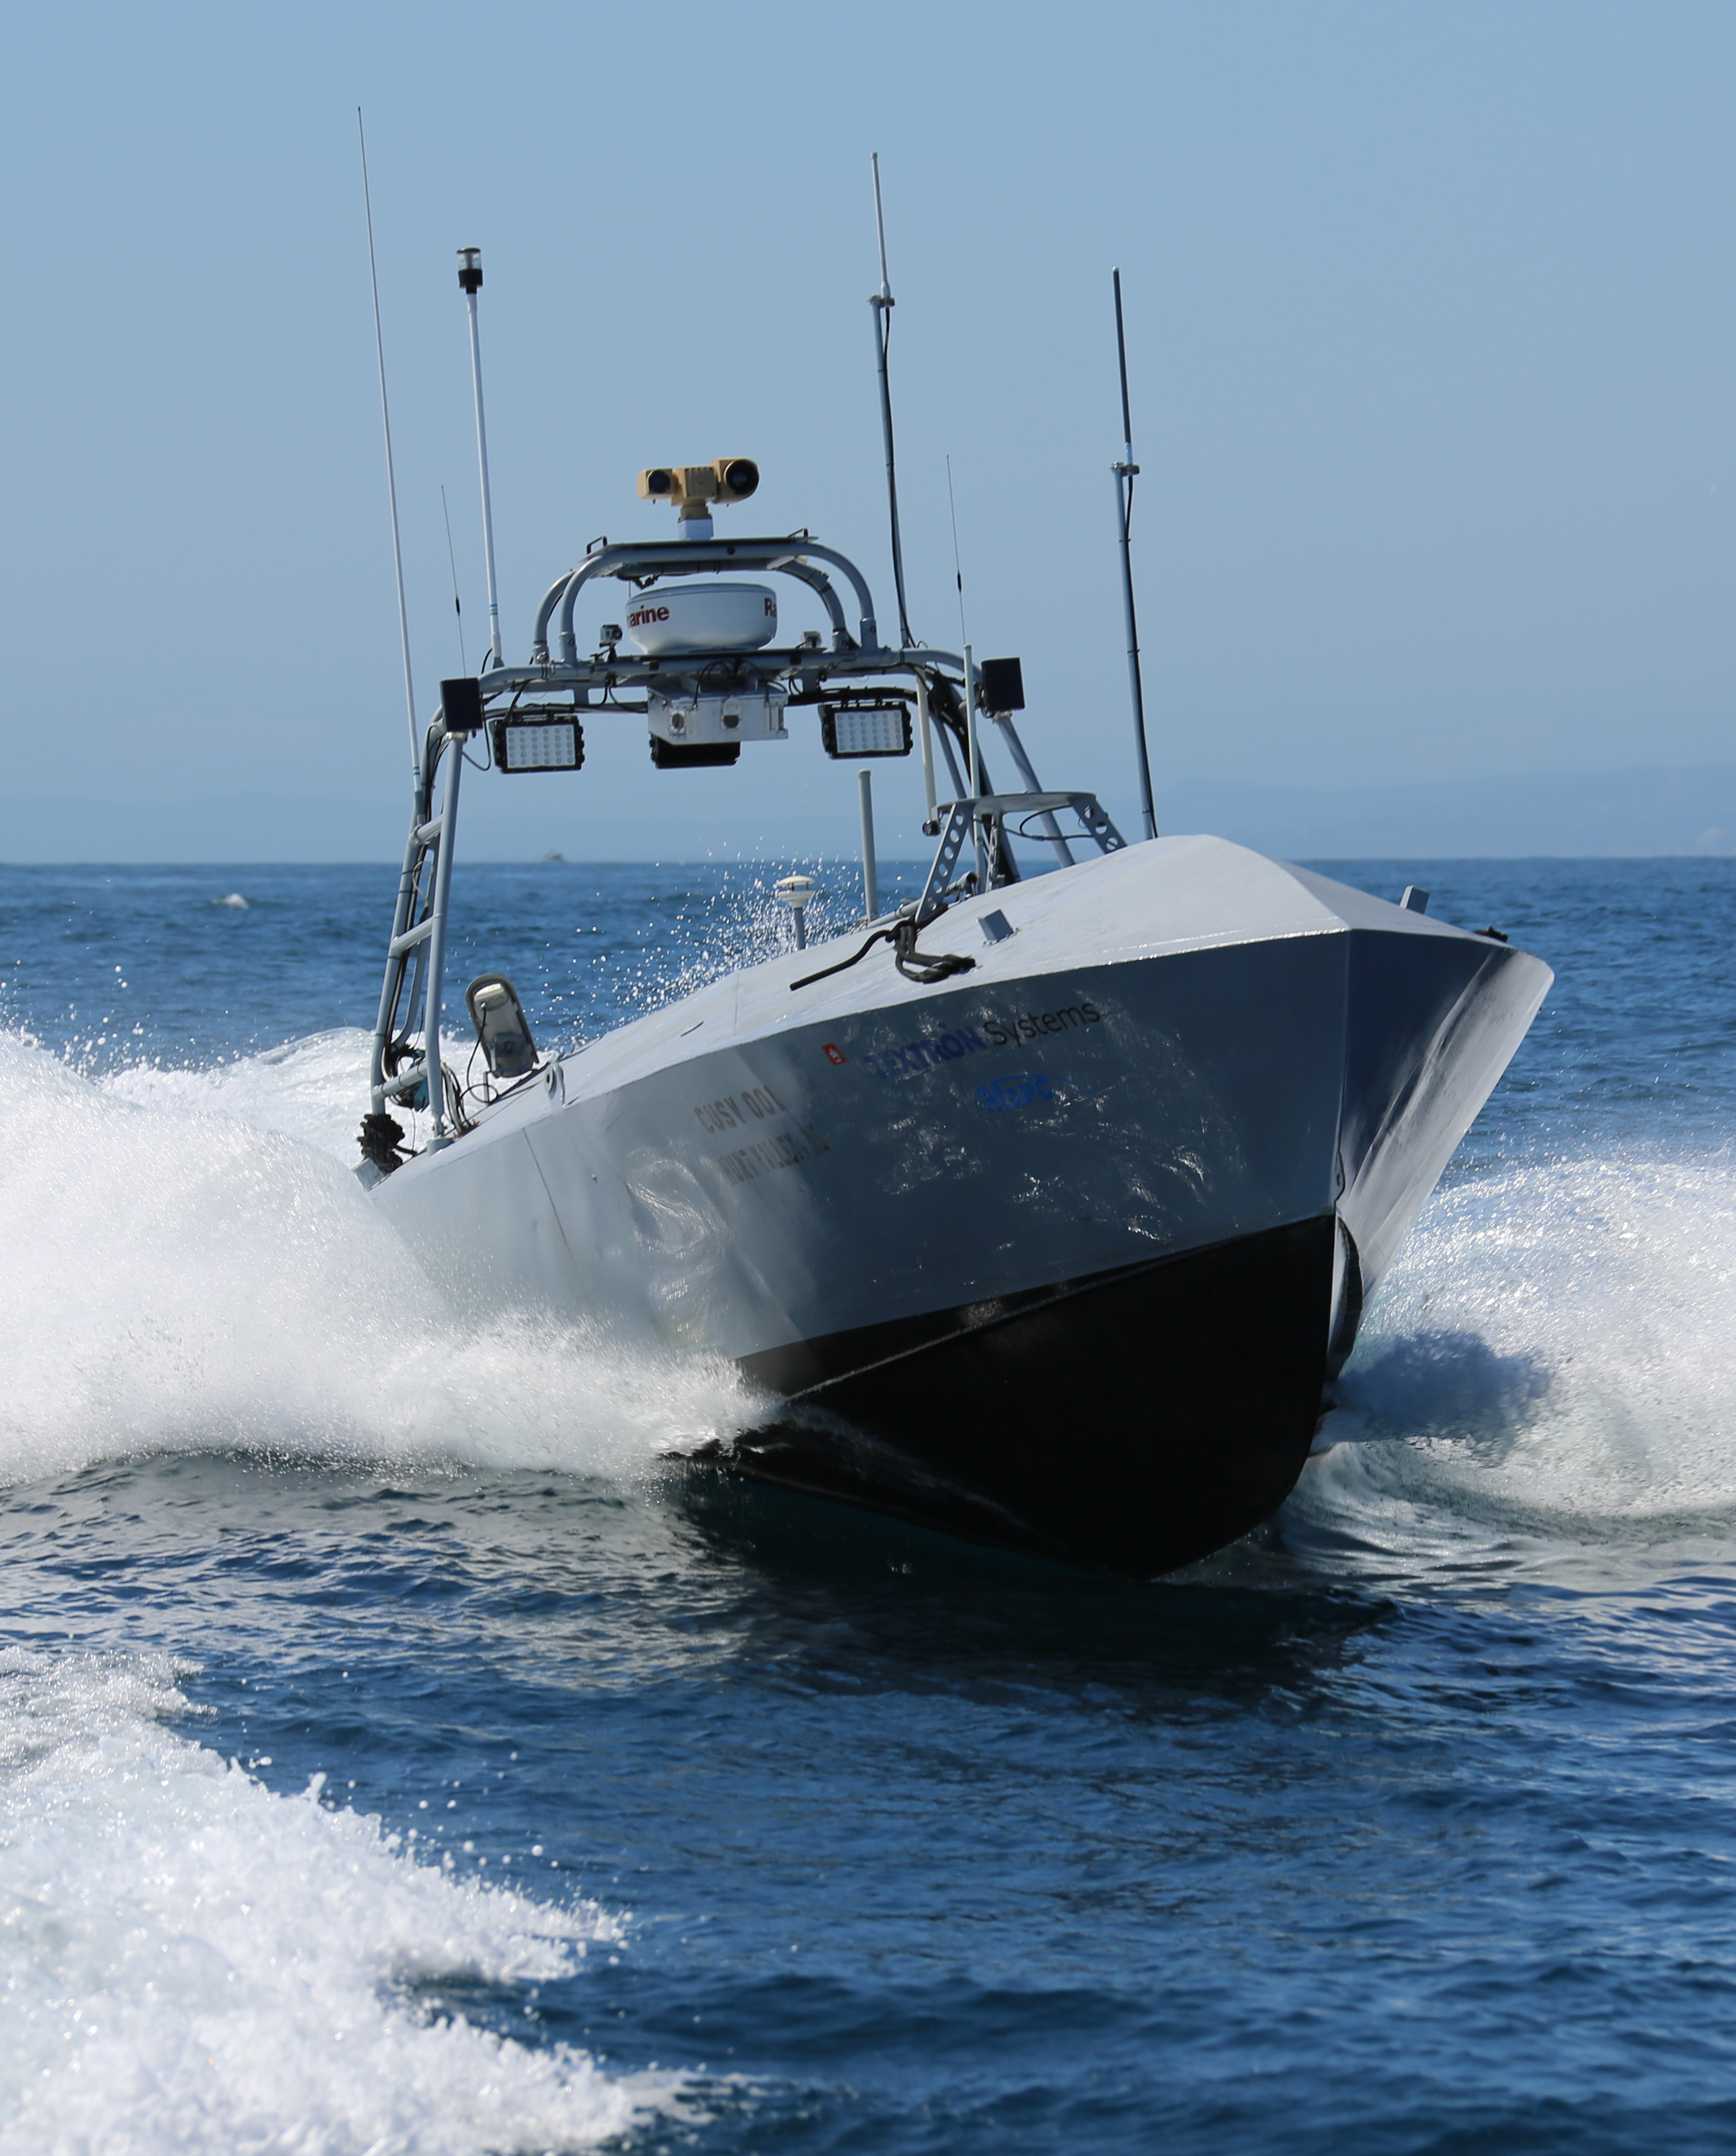 Common Unmanned Surface Vehicle. Textron photo.